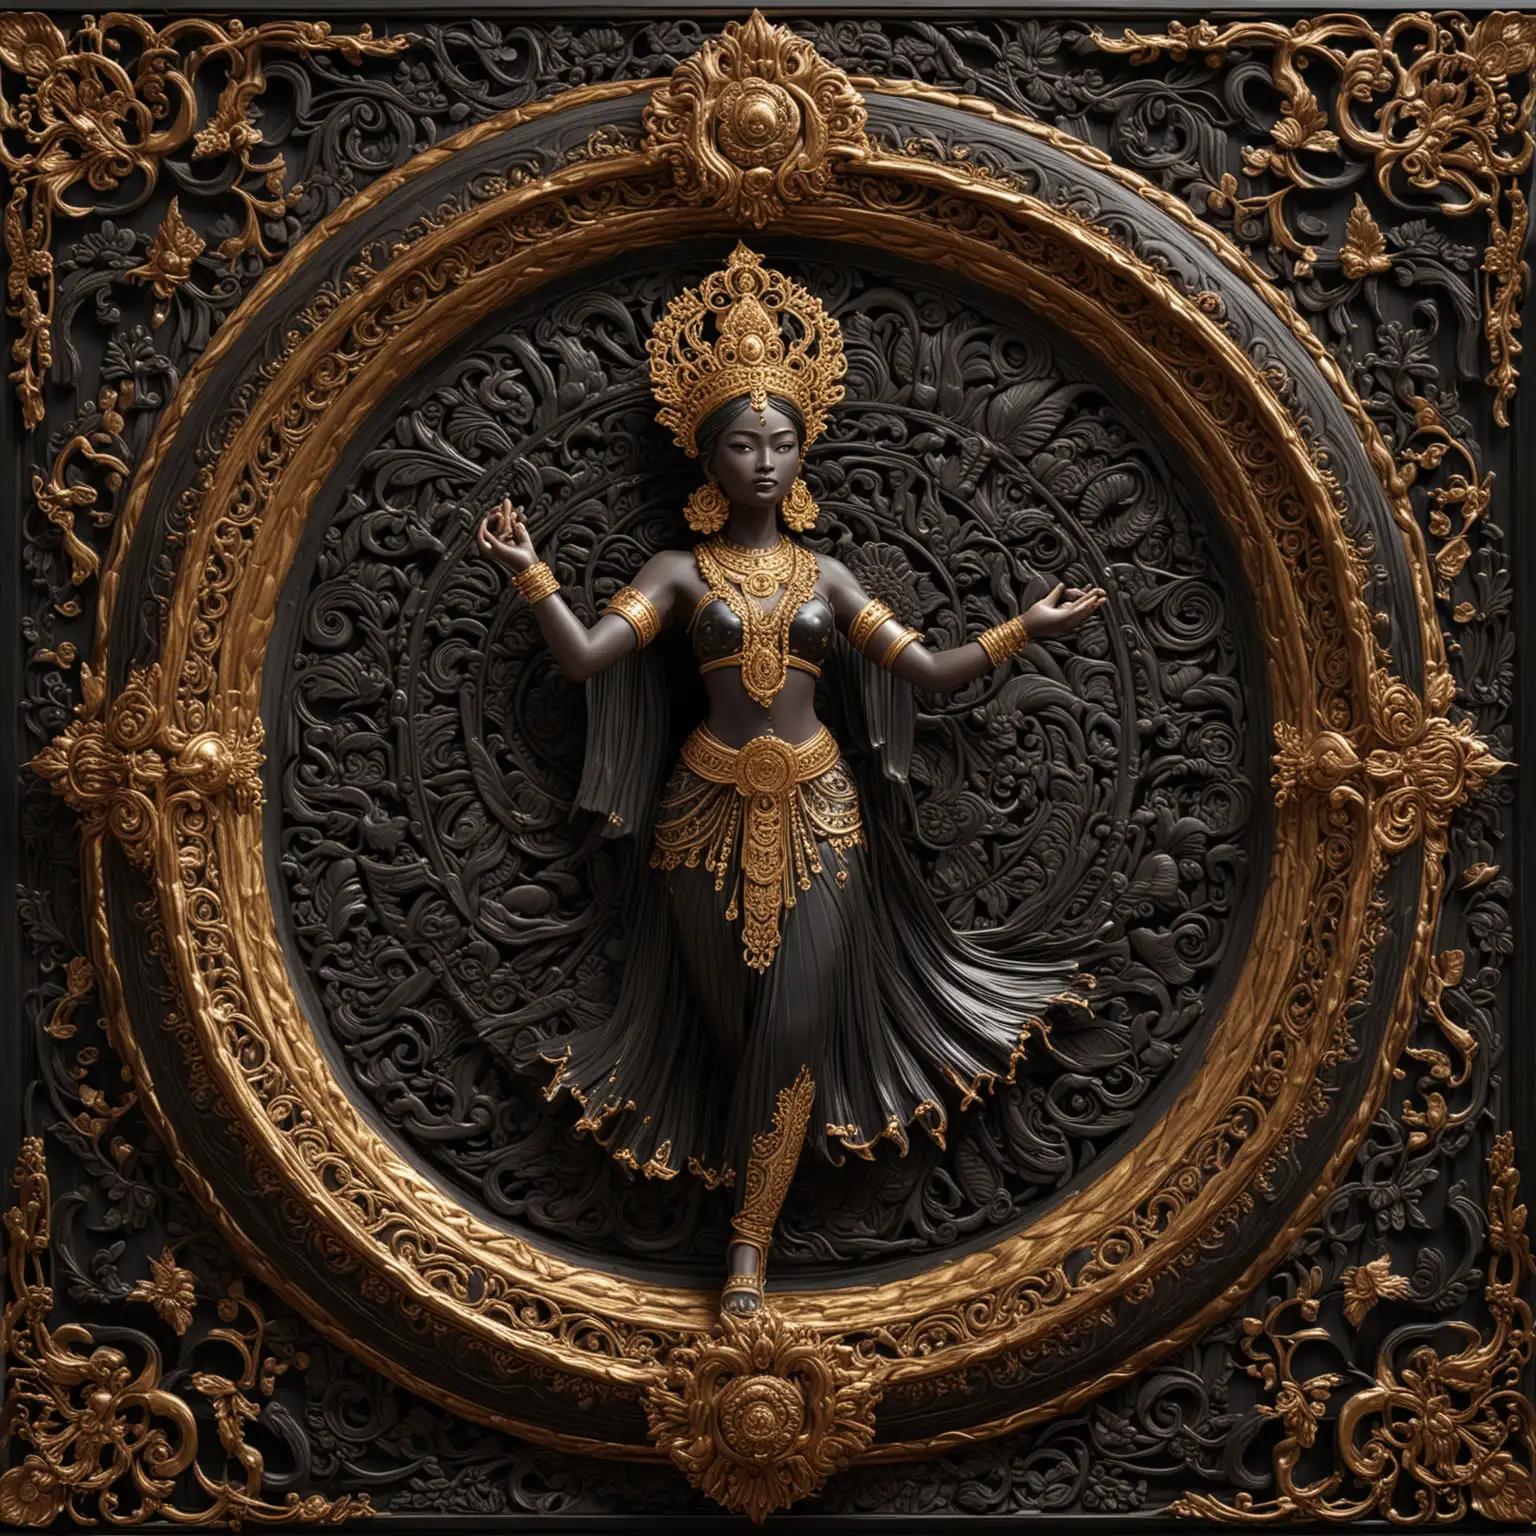 3D SEAMLESS AND TILEABLE BLACK LACQUERED WOOD WITH A FINELY CARVED FRAMED SURROUND FEATURING A CARVED WOOD THAI DANCER WITH A GOLD HEADDRESS





